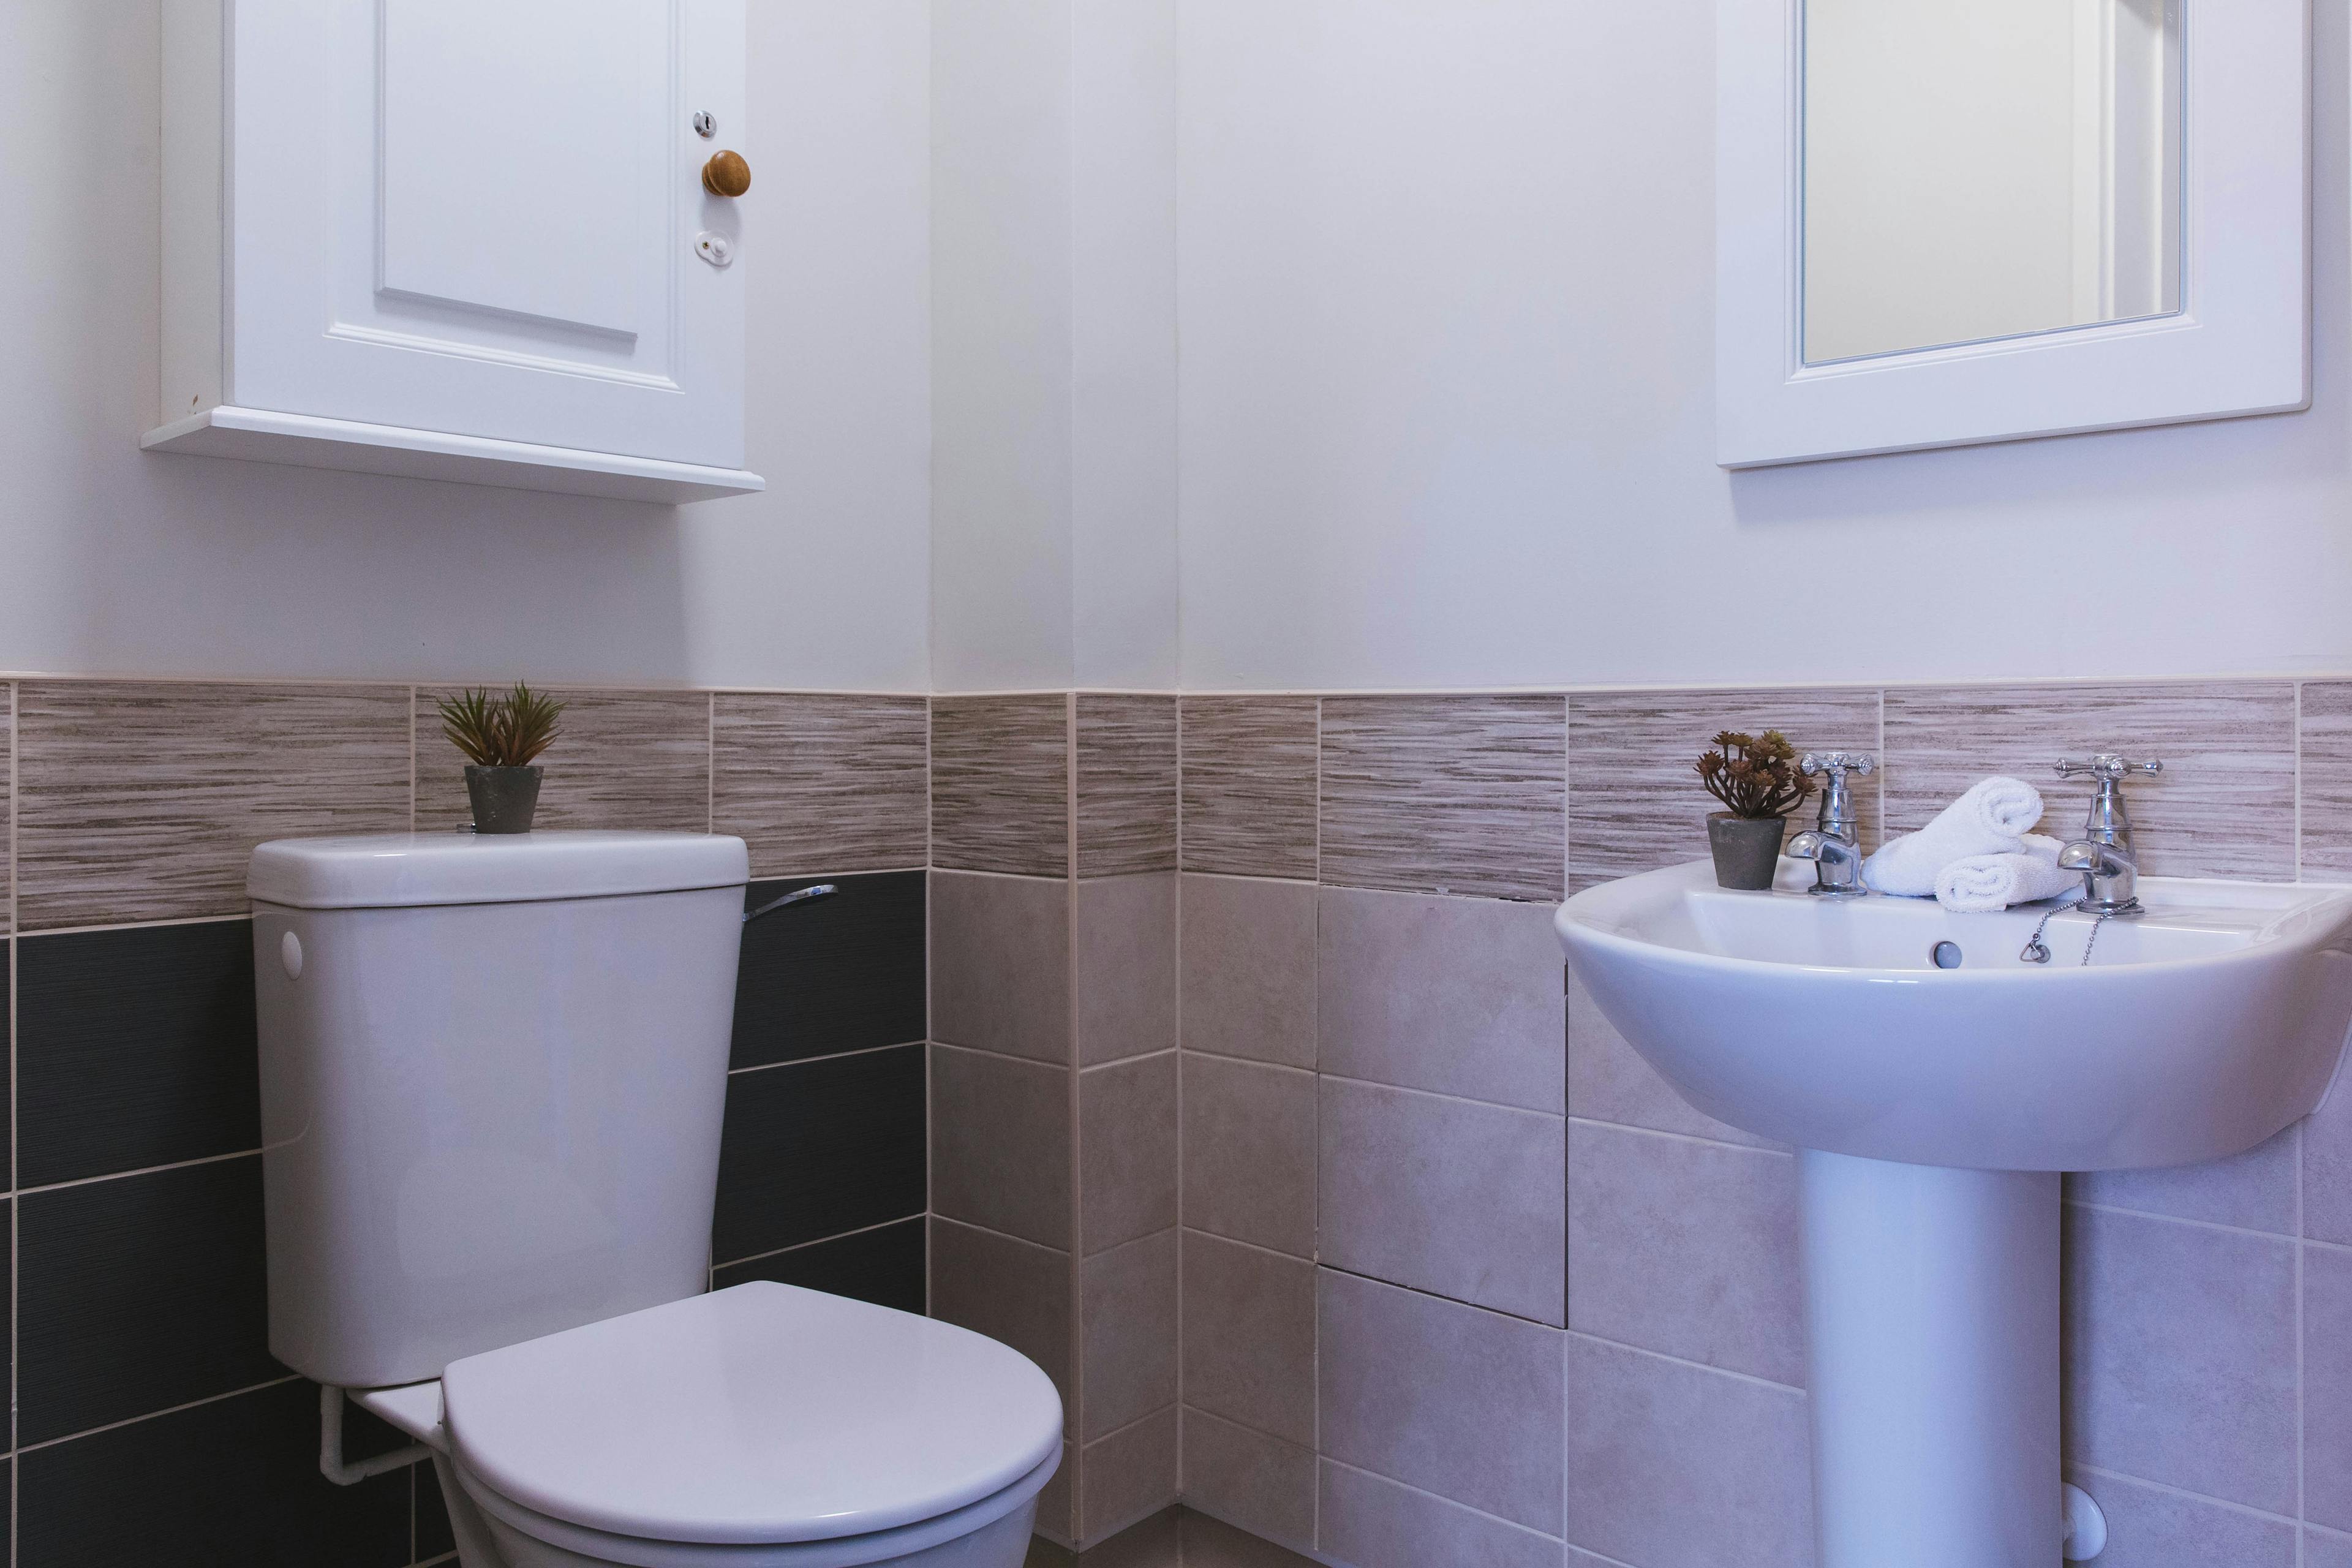 Bathroom at Rose Lodge Care Home in Wisbech, Cambridgeshire